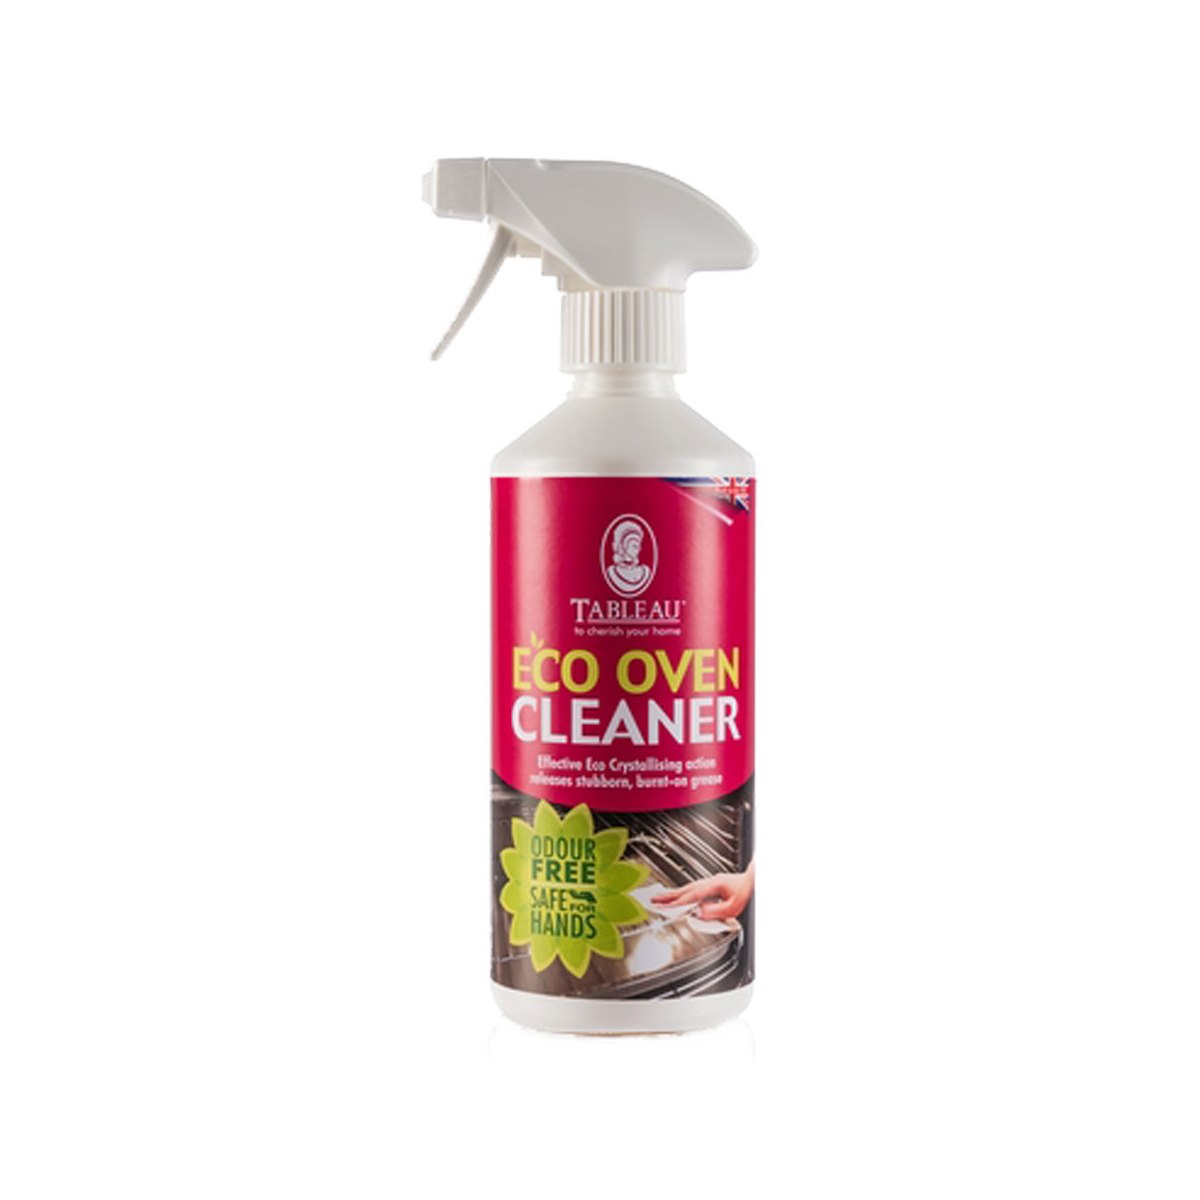 Tableau Eco Oven Cleaner Spray 500ml